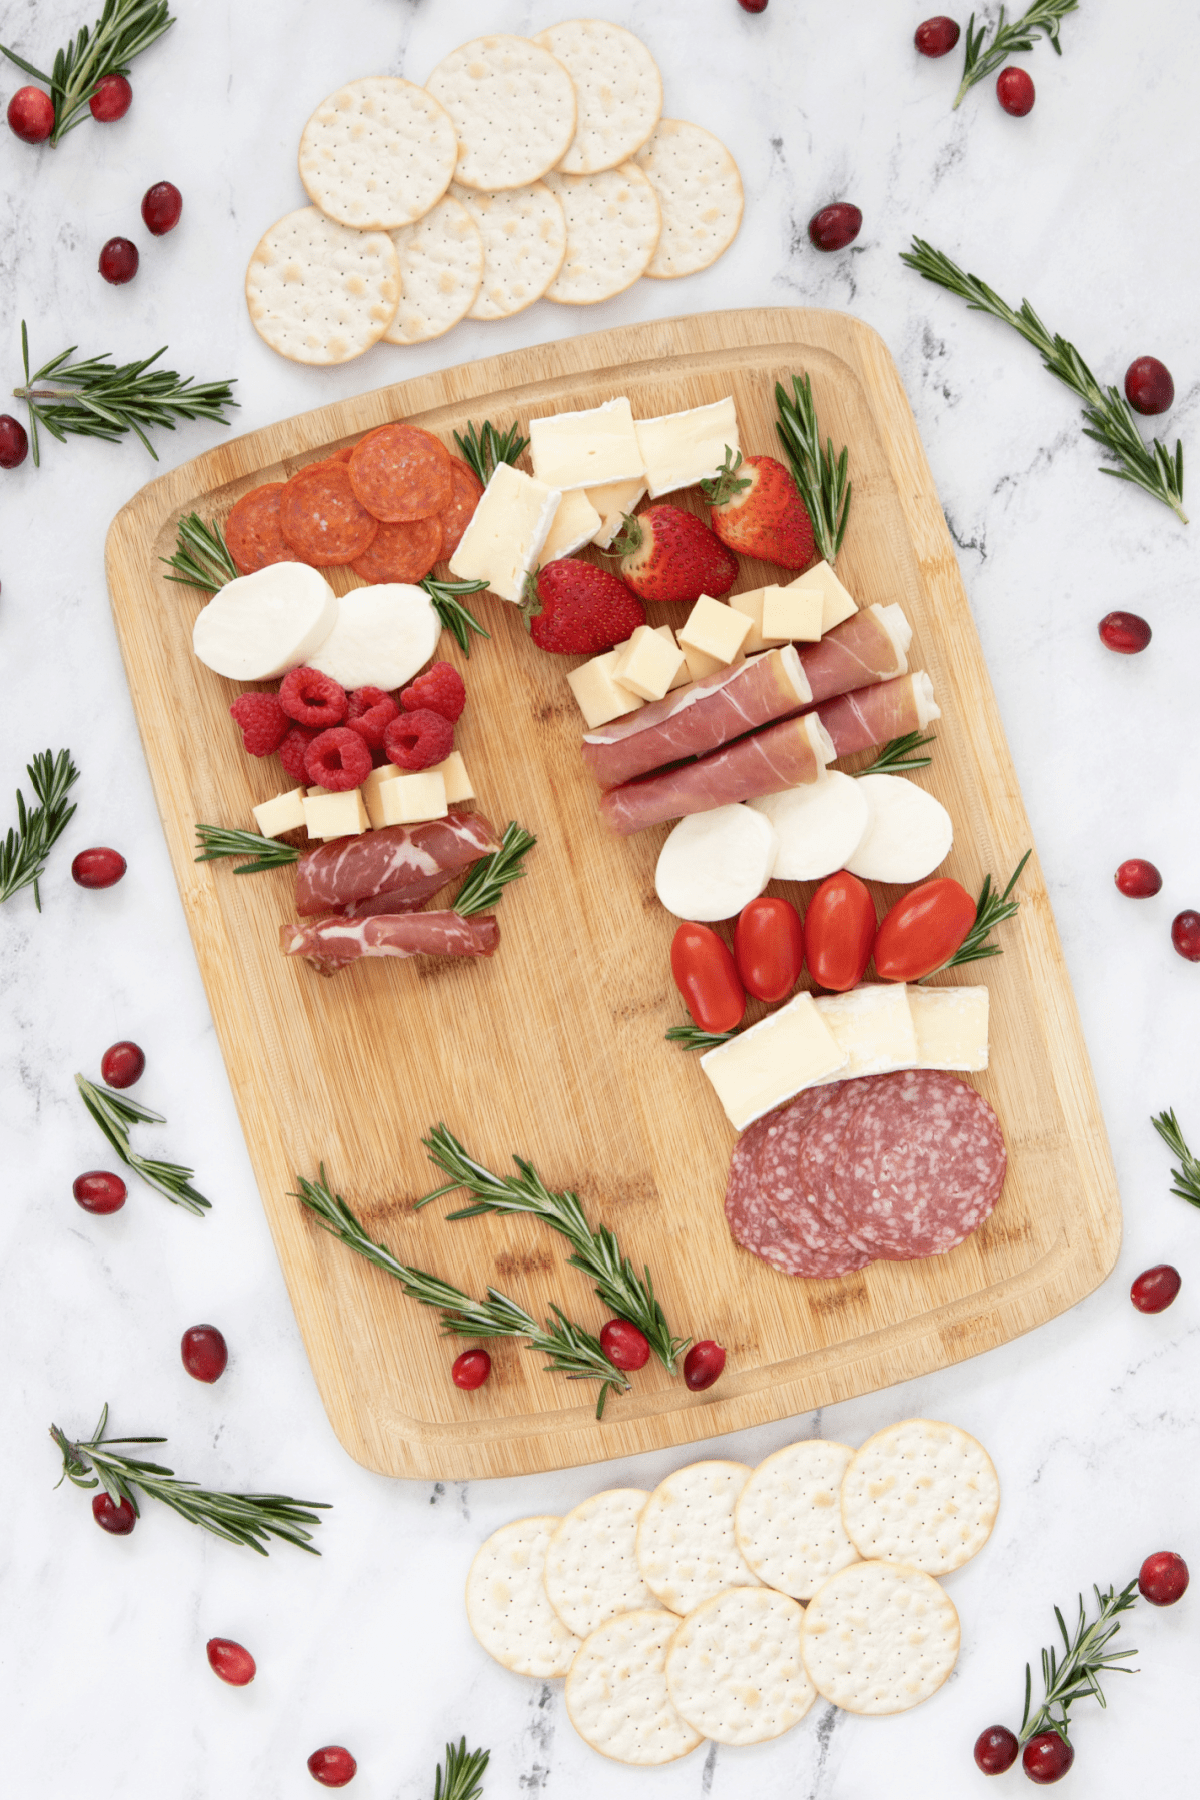 Candy cane inspired charcuterie board